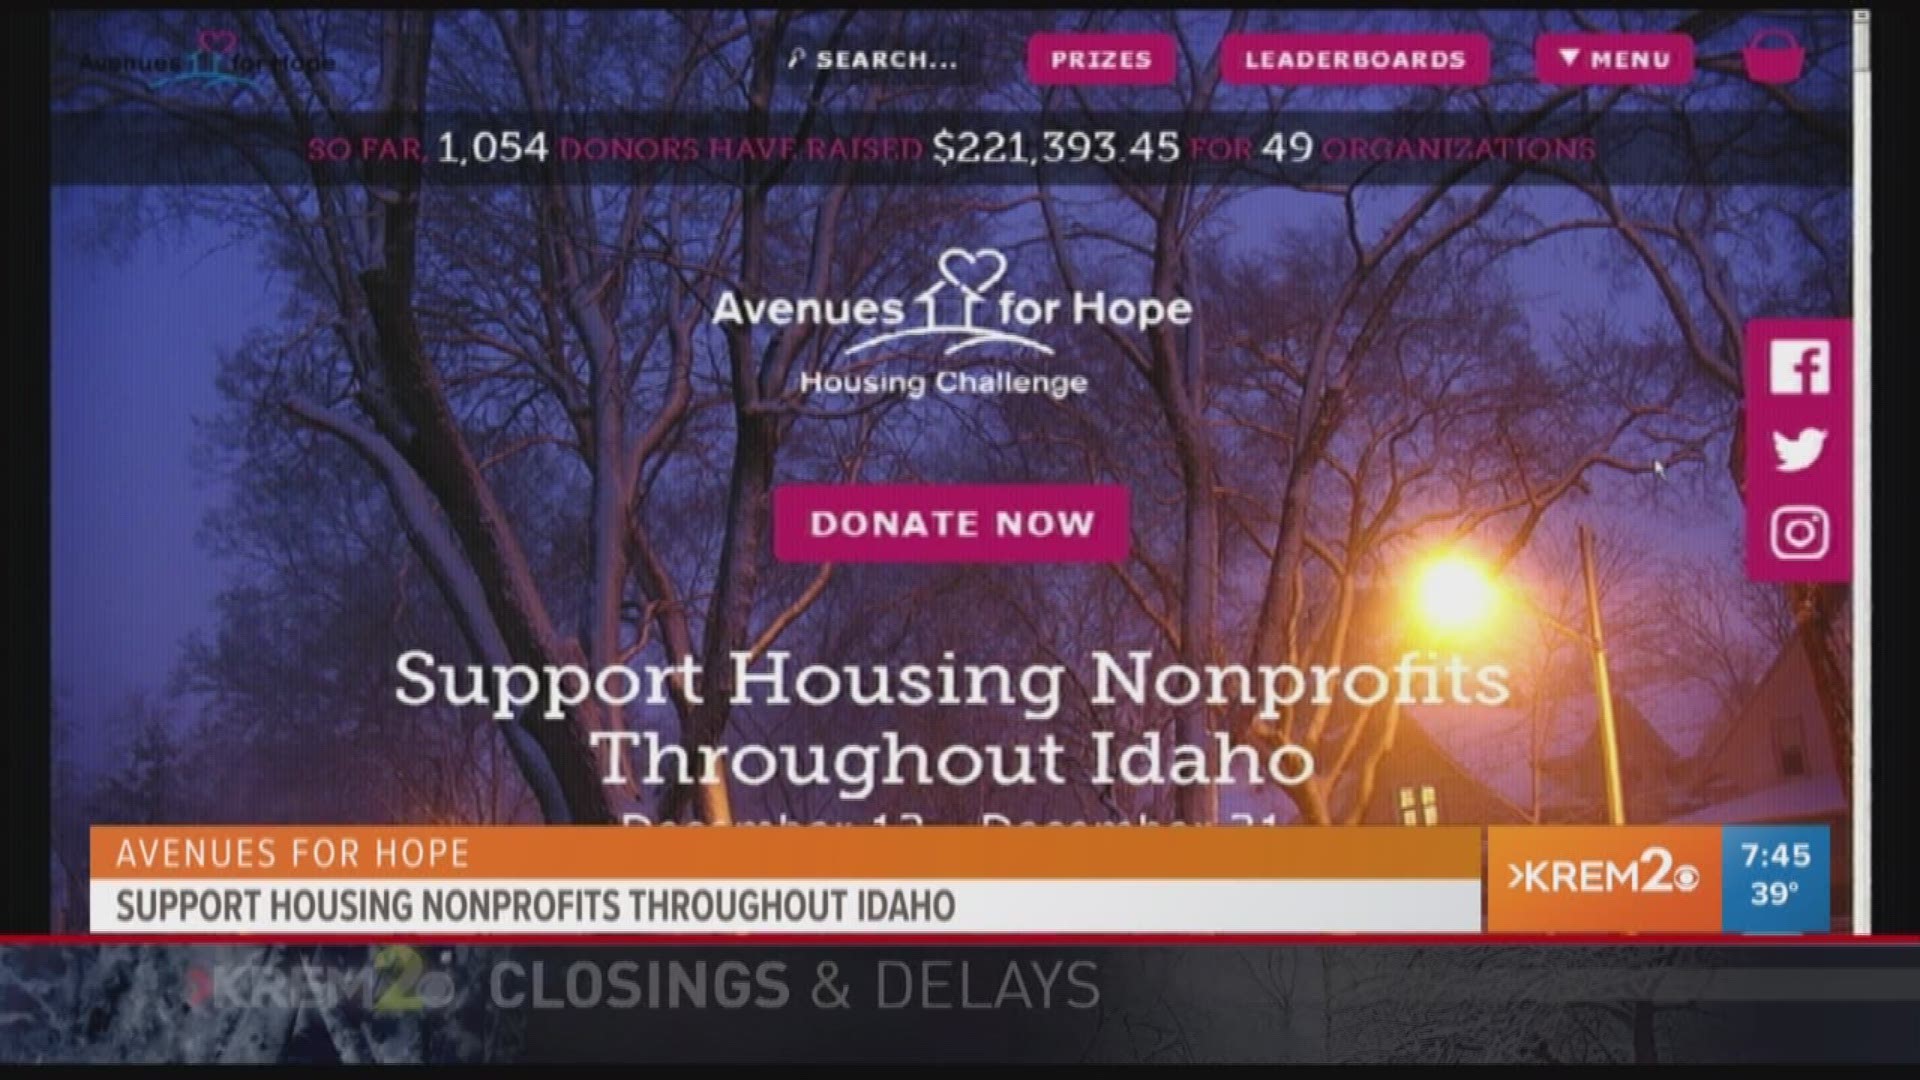 Avenues For Hope raises money for 55 different nonprofits that provide housing and fight homelessness in Idaho.